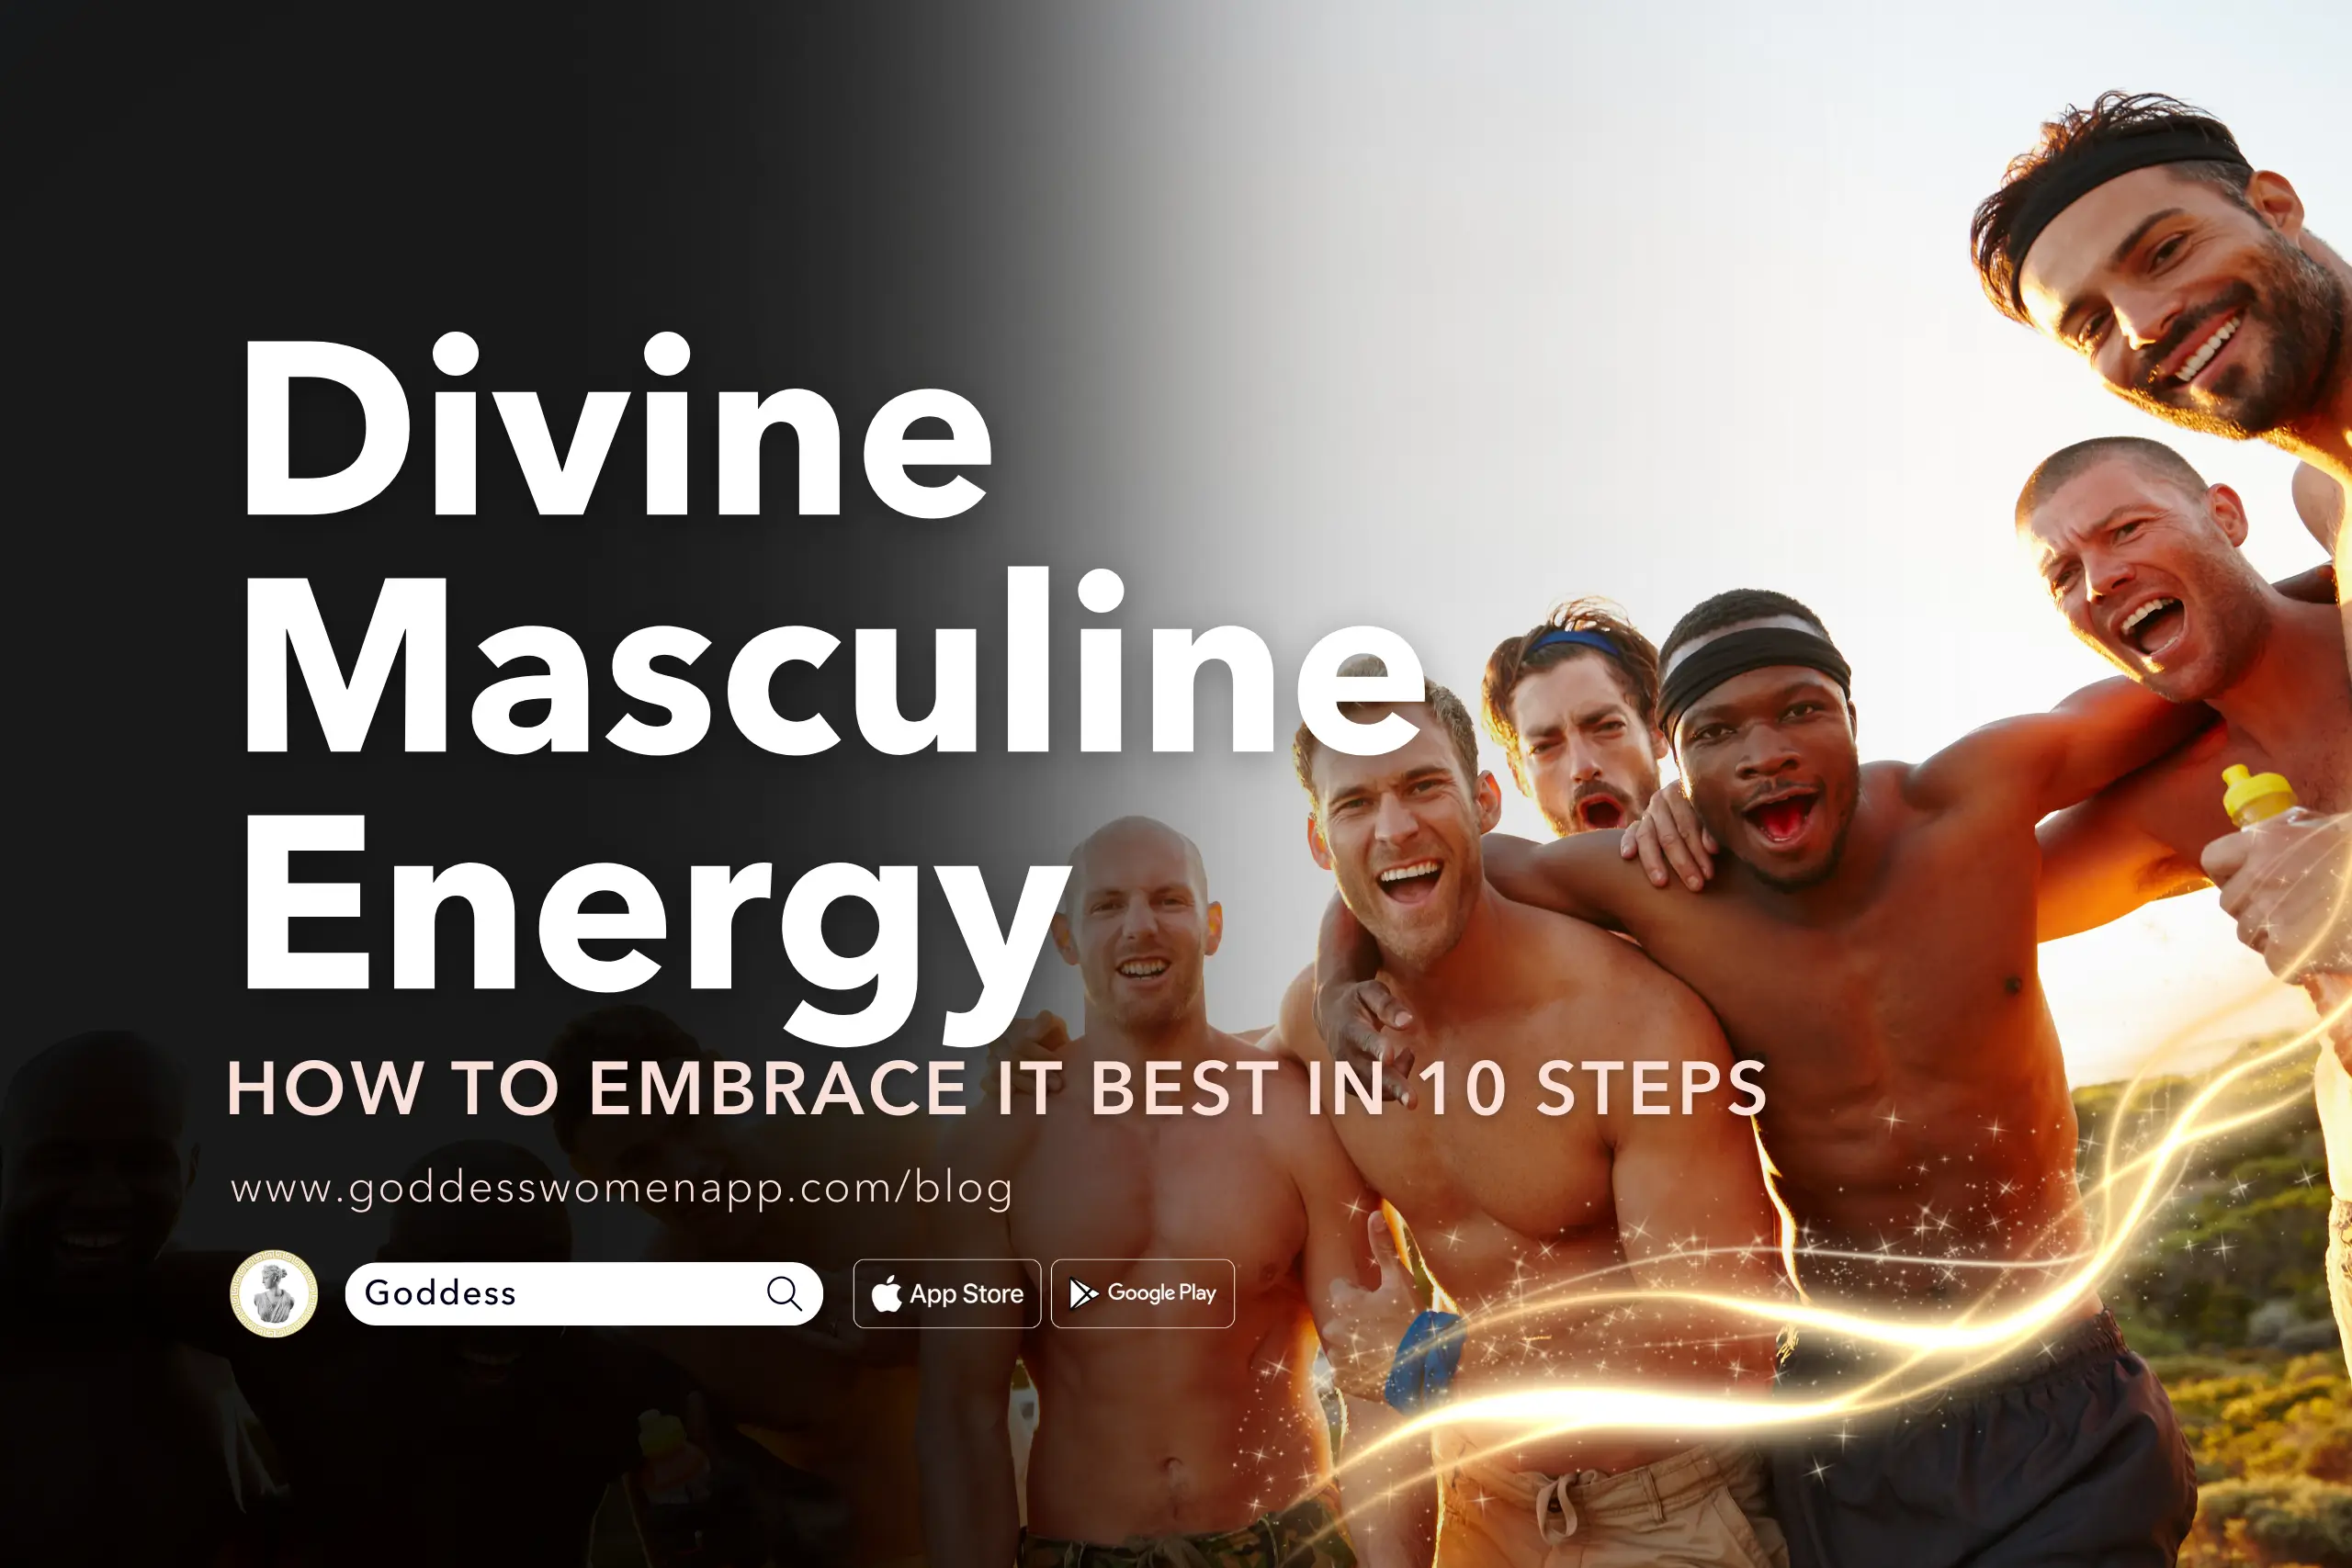 Divine Masculine Energy: How to Embrace It Best in 10 Steps